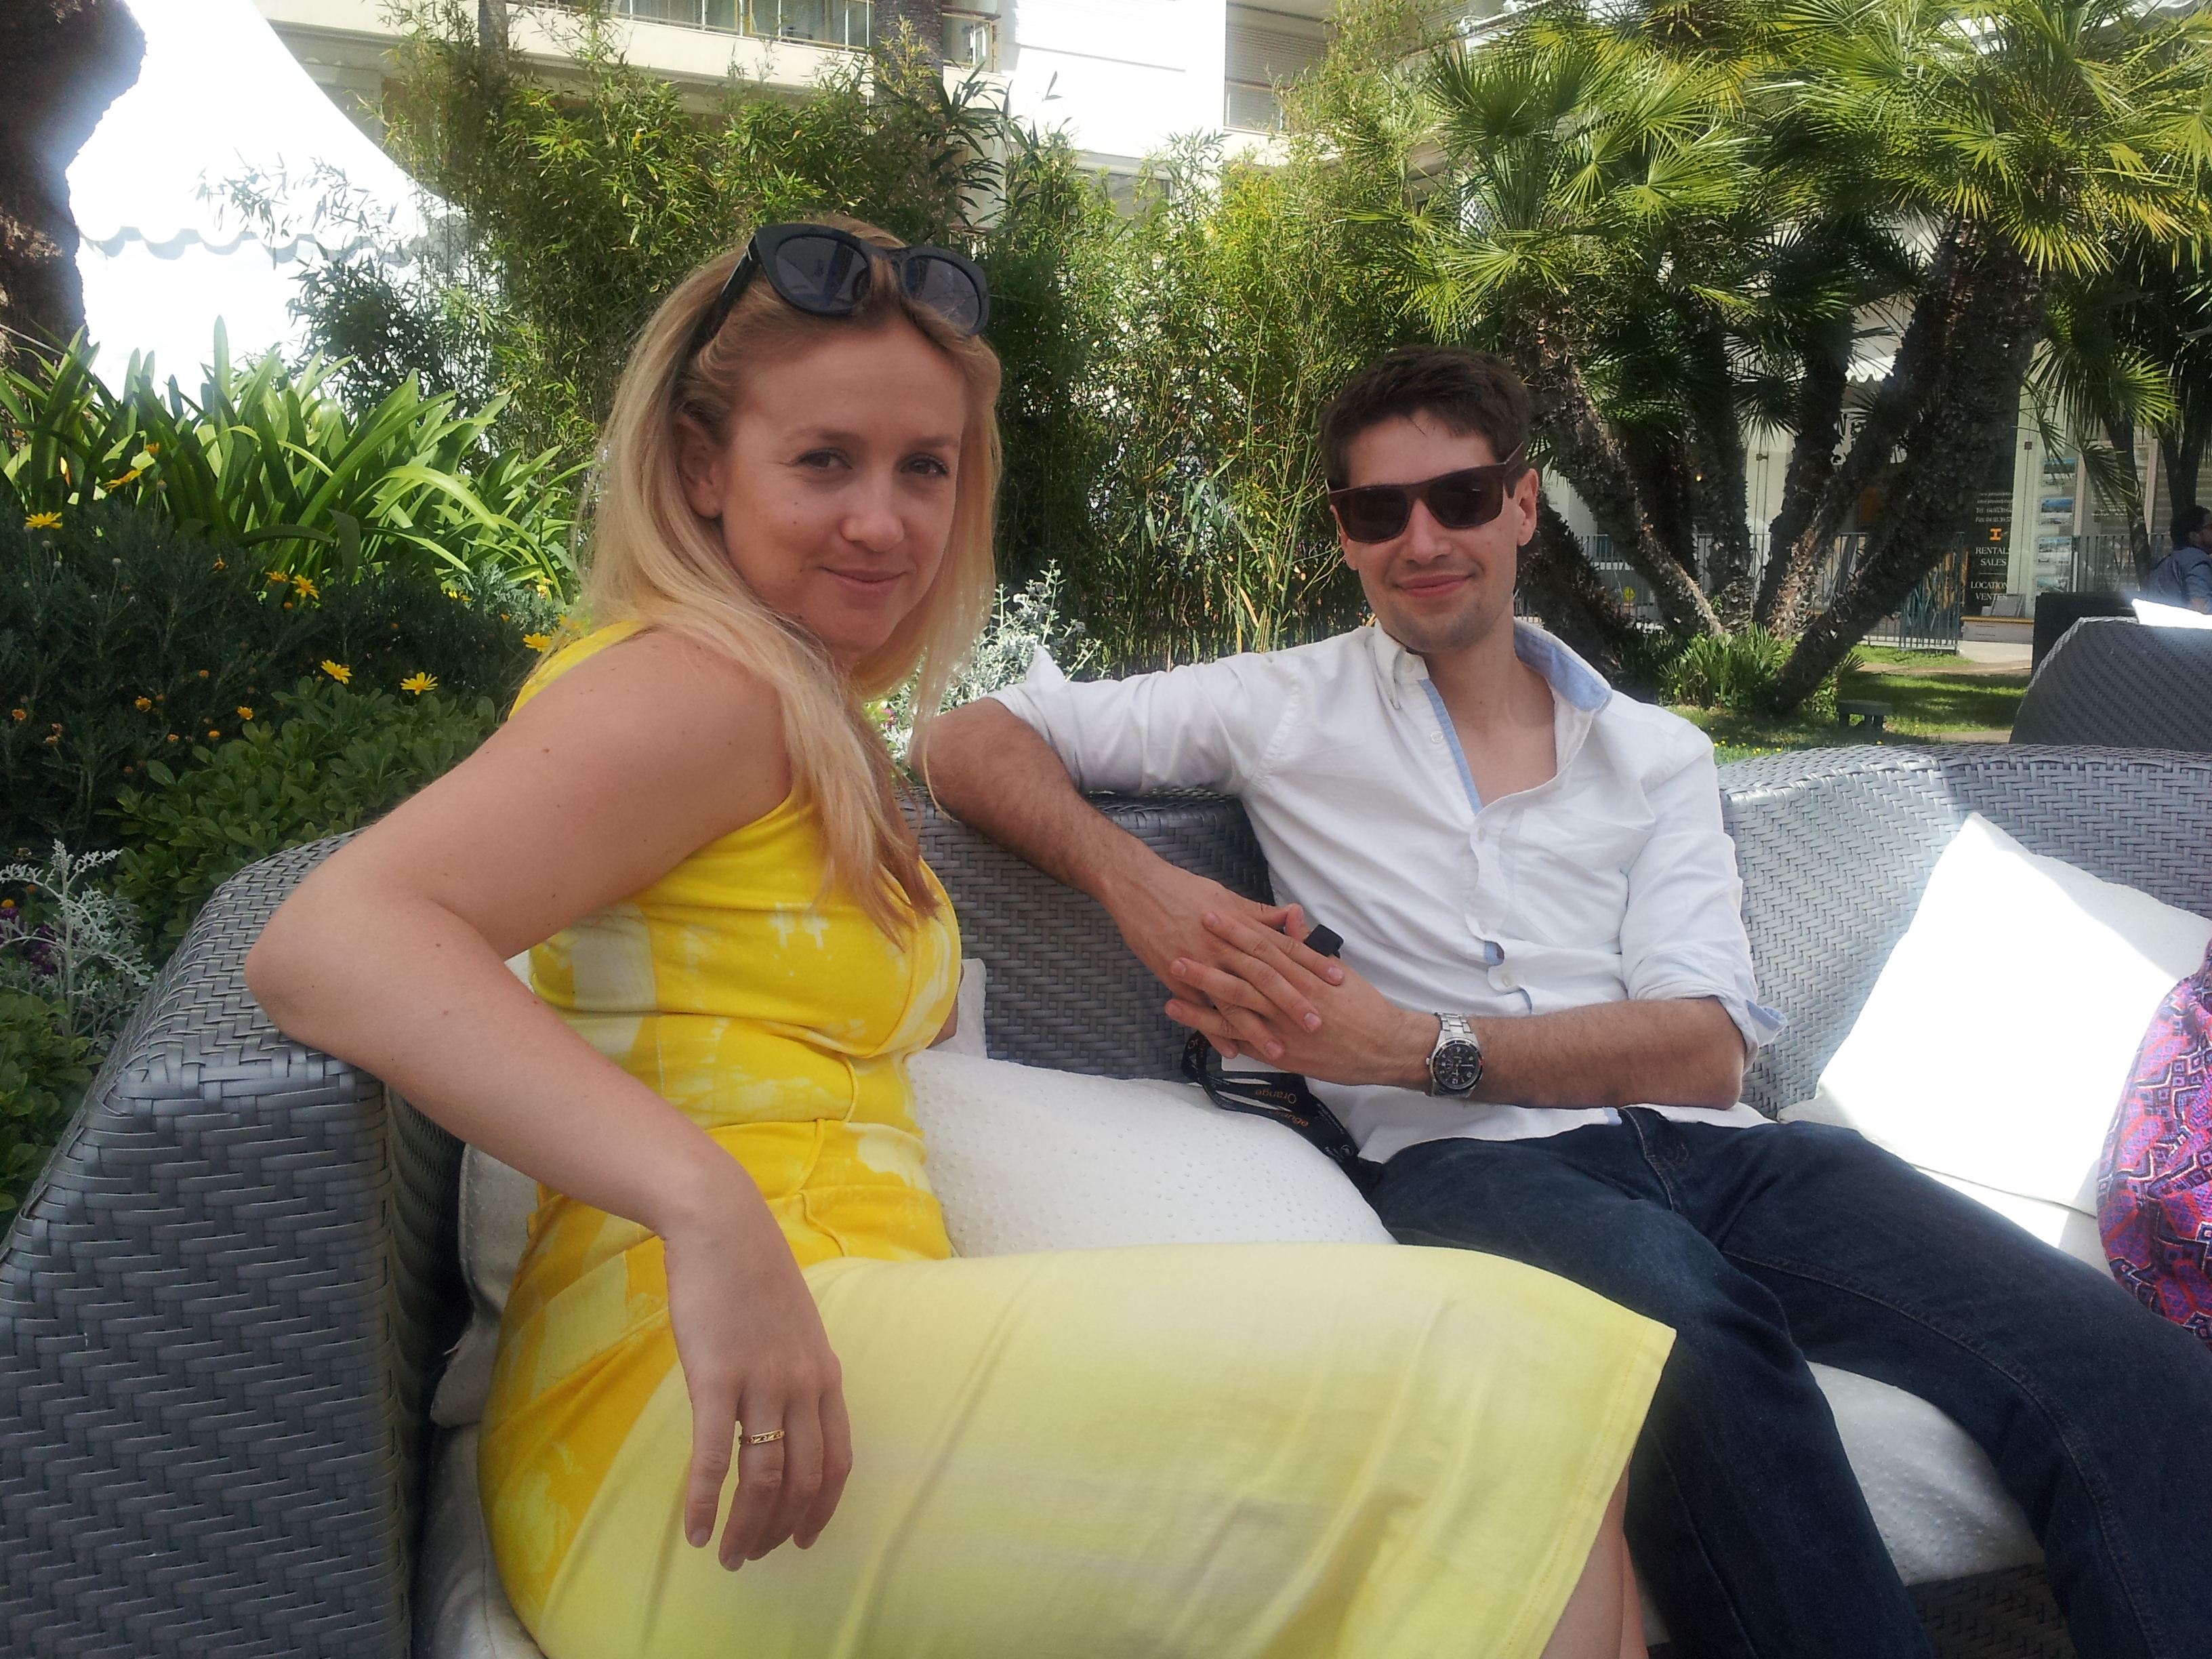 At Cannes Film Festival 2014. With Zara Symes.